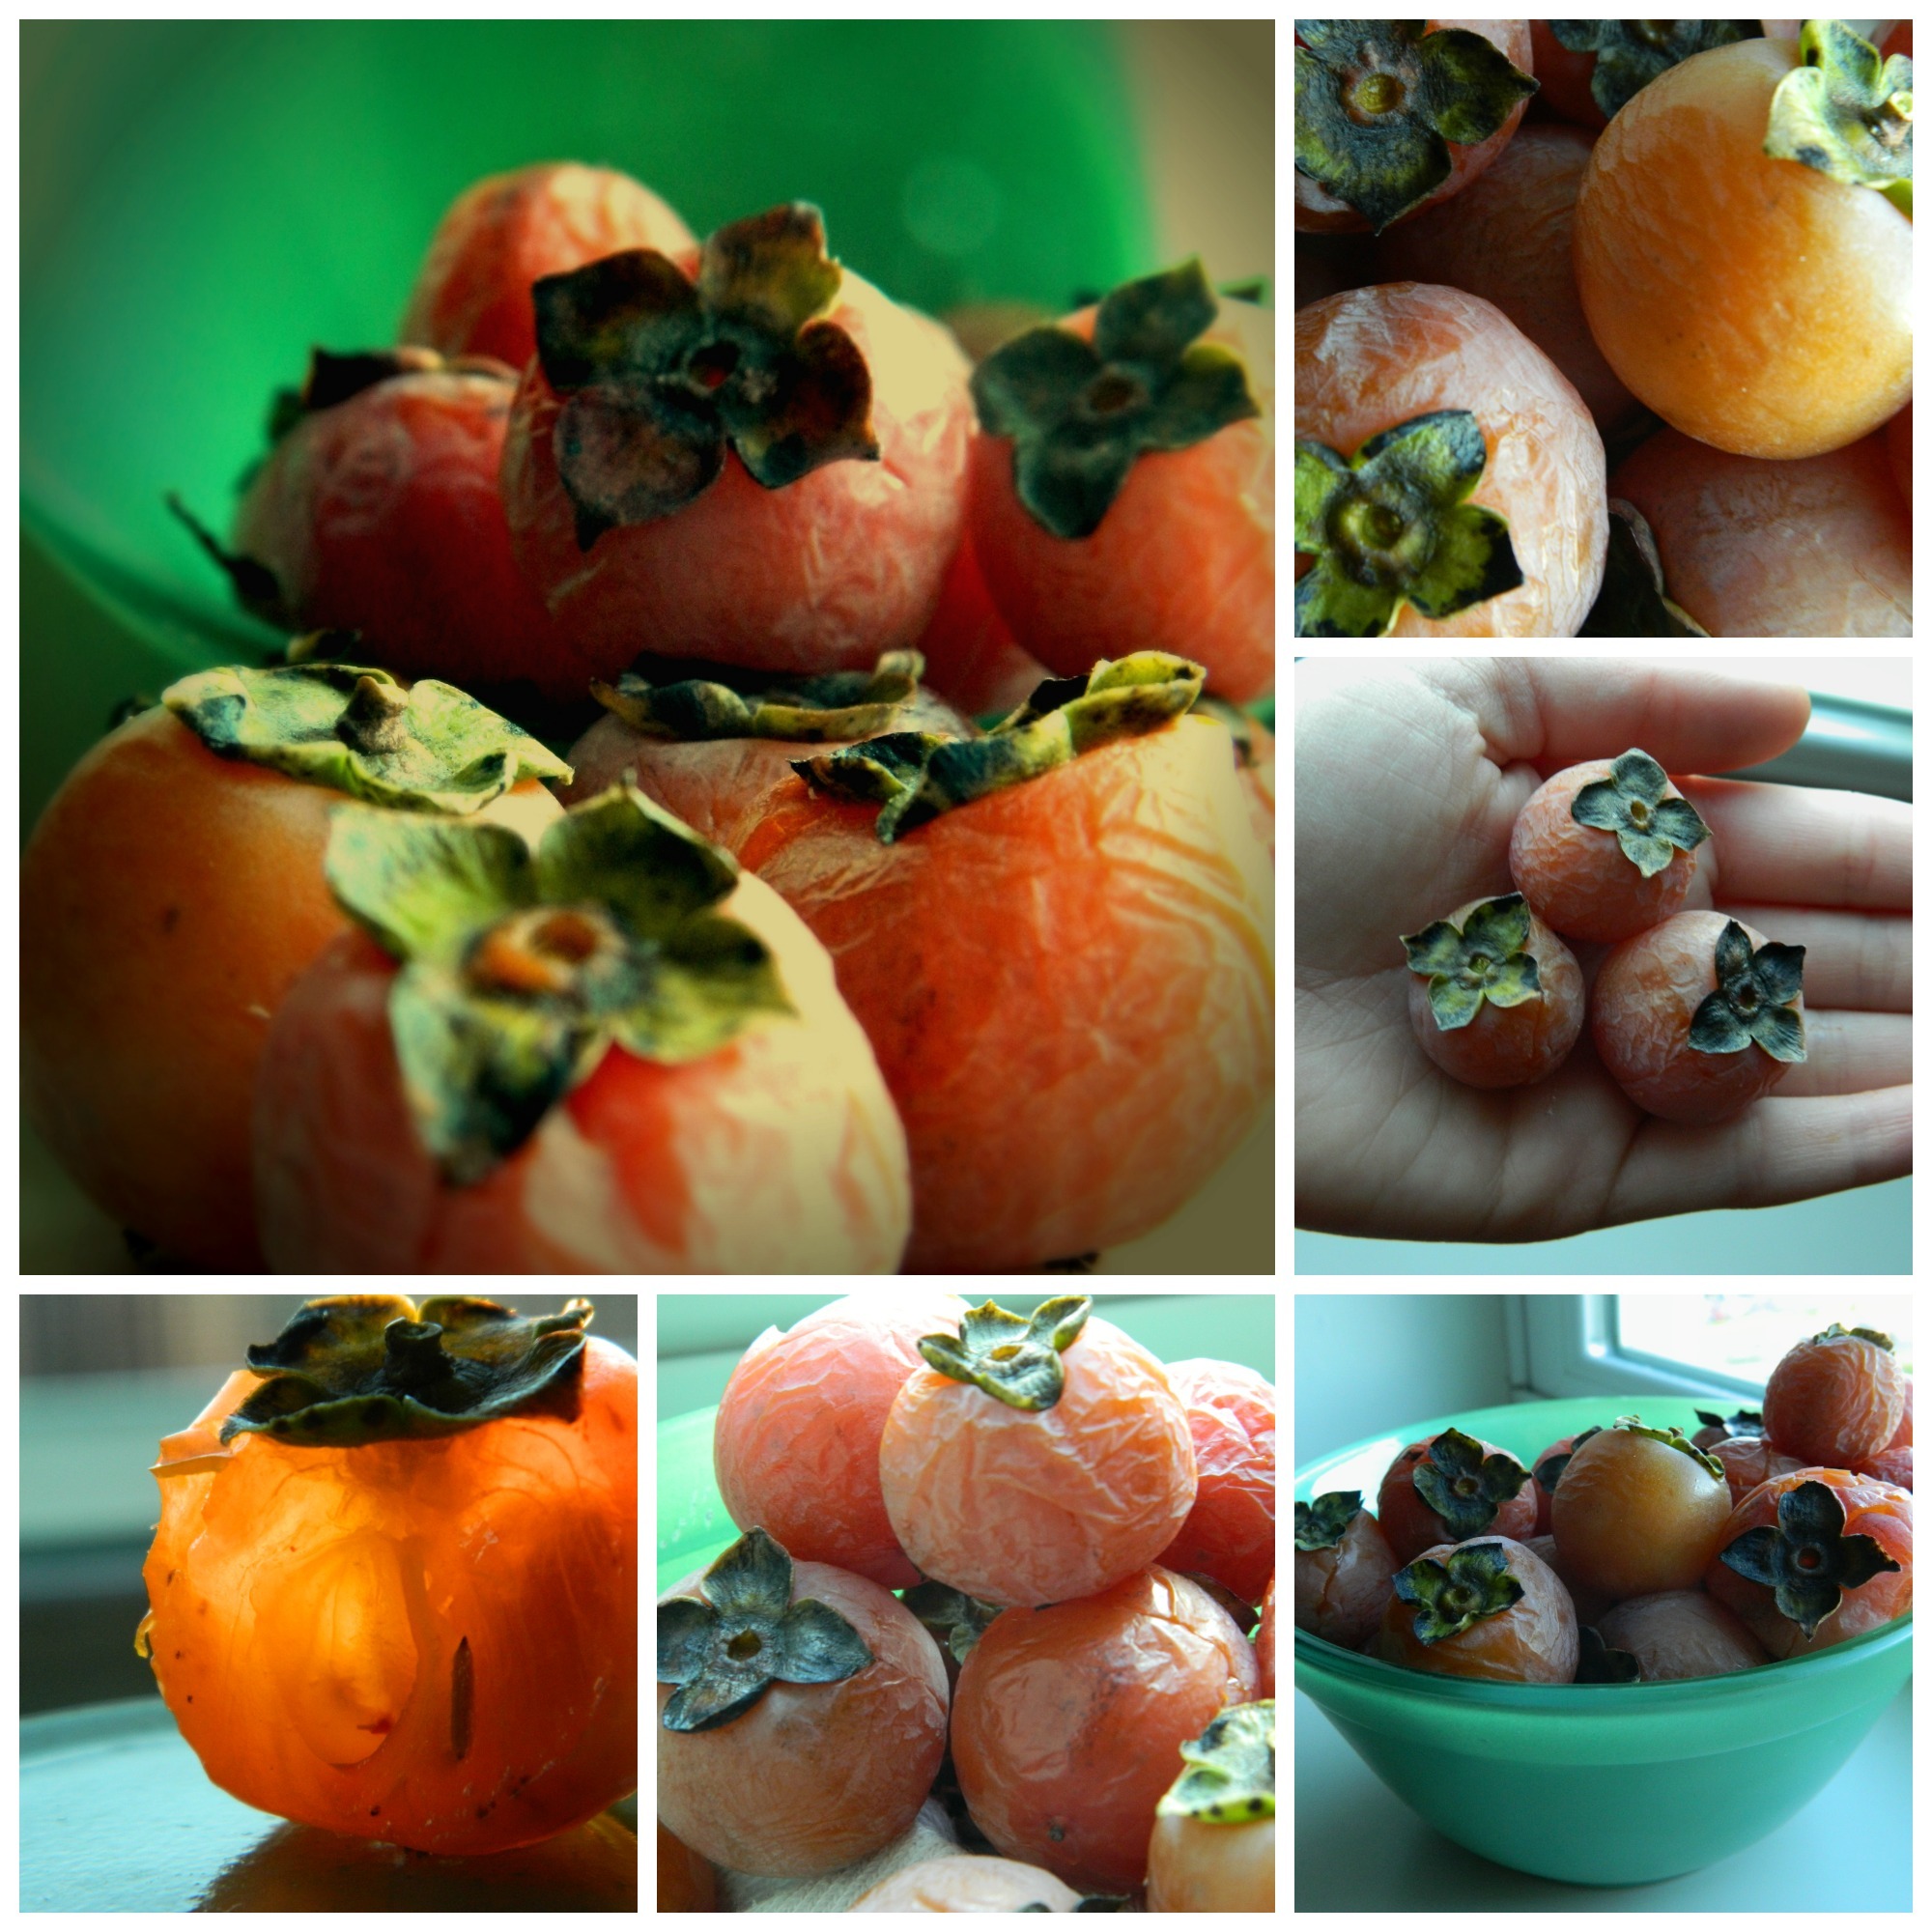 American Persimmon berry 1-5<br />
